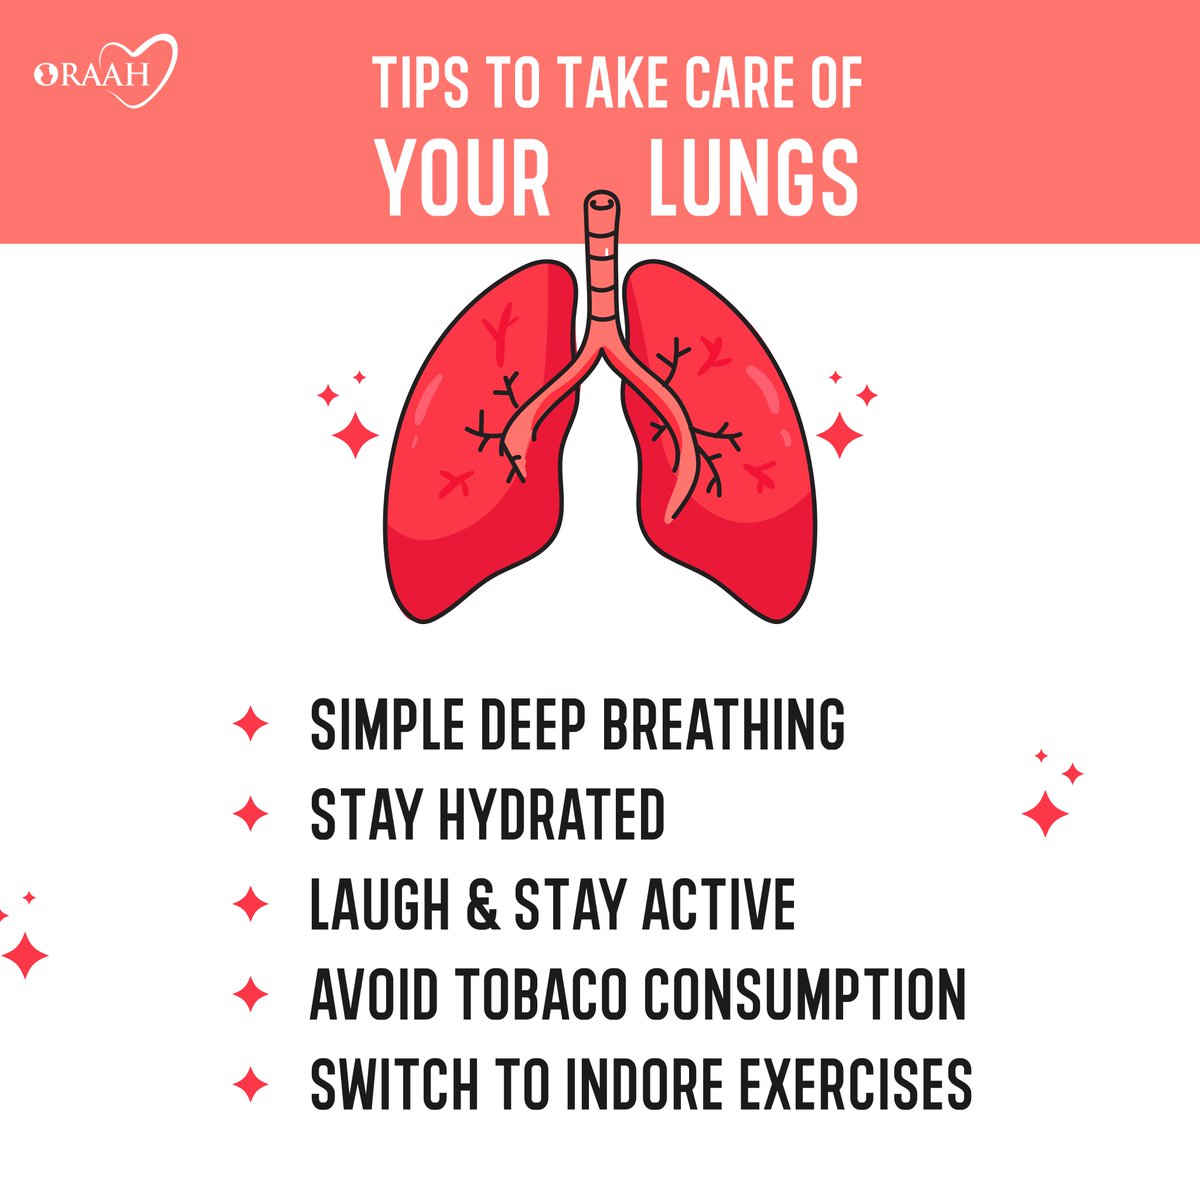 Twitter:
Simple steps to keep your lungs healthy: deep breathing, hydration, laughter, exercise, and no tobacco!

#lungs #lungscleansetea #lungs #breathe #respiratorycare #invisibleillness #healthy #exercise #tips #lungstips #lungshealth #oraah #notobaco #lungstea #greentea